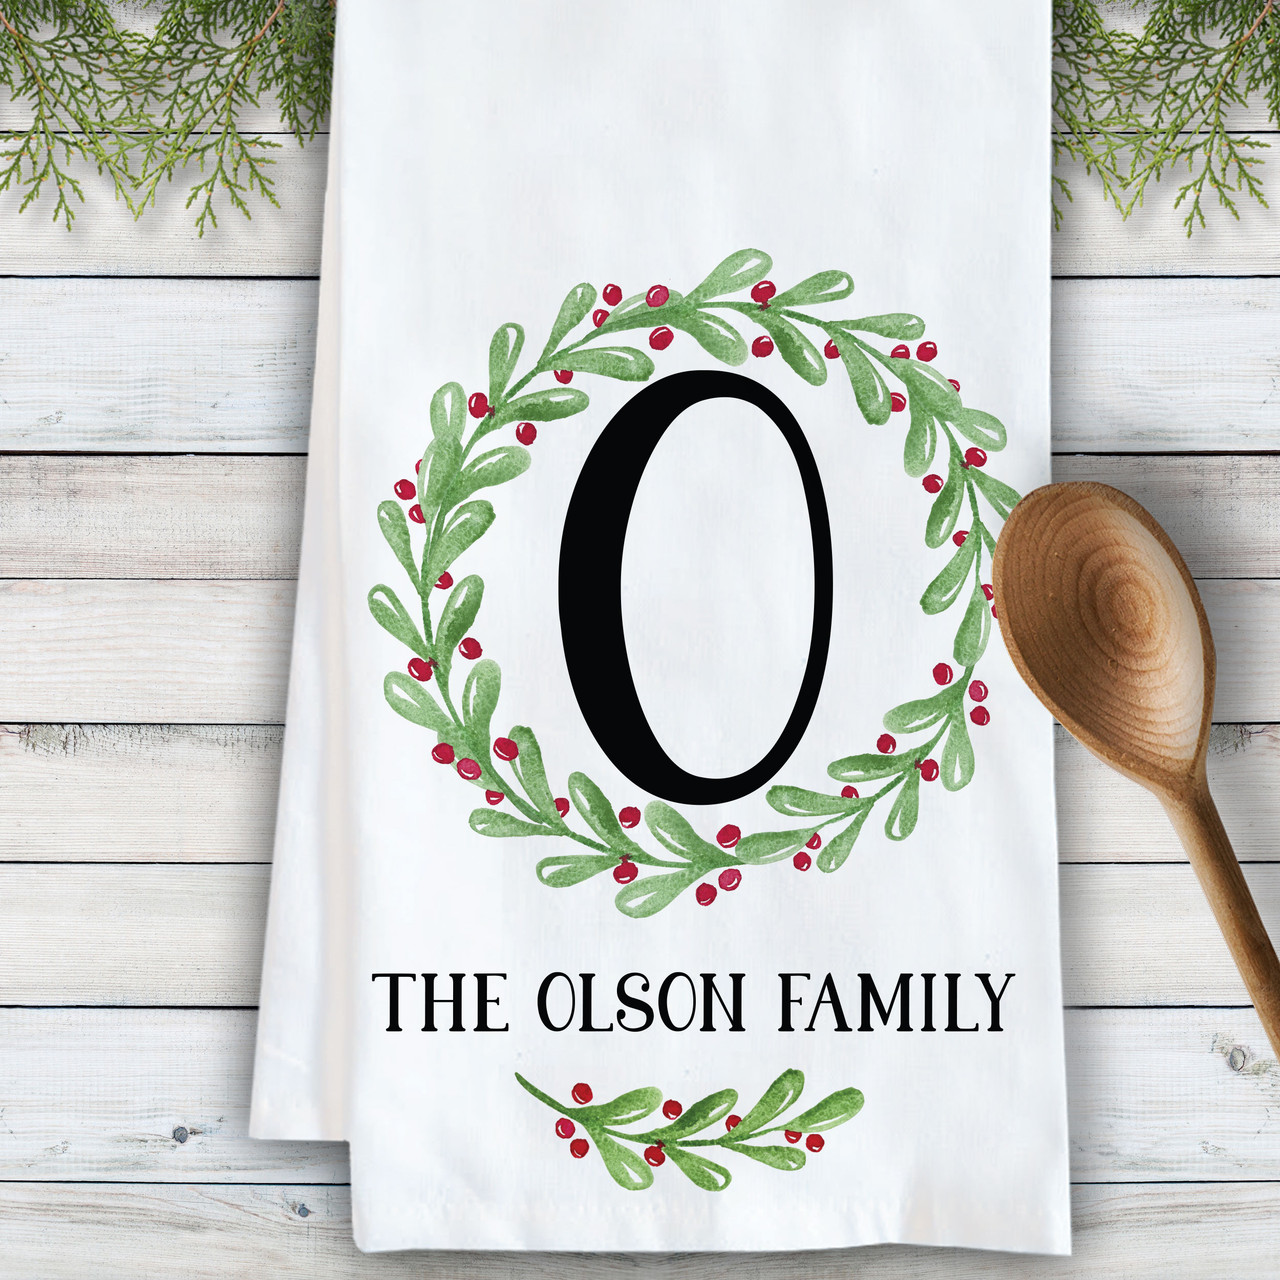 https://cdn11.bigcommerce.com/s-5grzuu6/images/stencil/1280x1280/products/5924/44015/Watercolor-Holly-Custom_Christmas_Kitchen-Towel__36161.1636404463.jpg?c=2